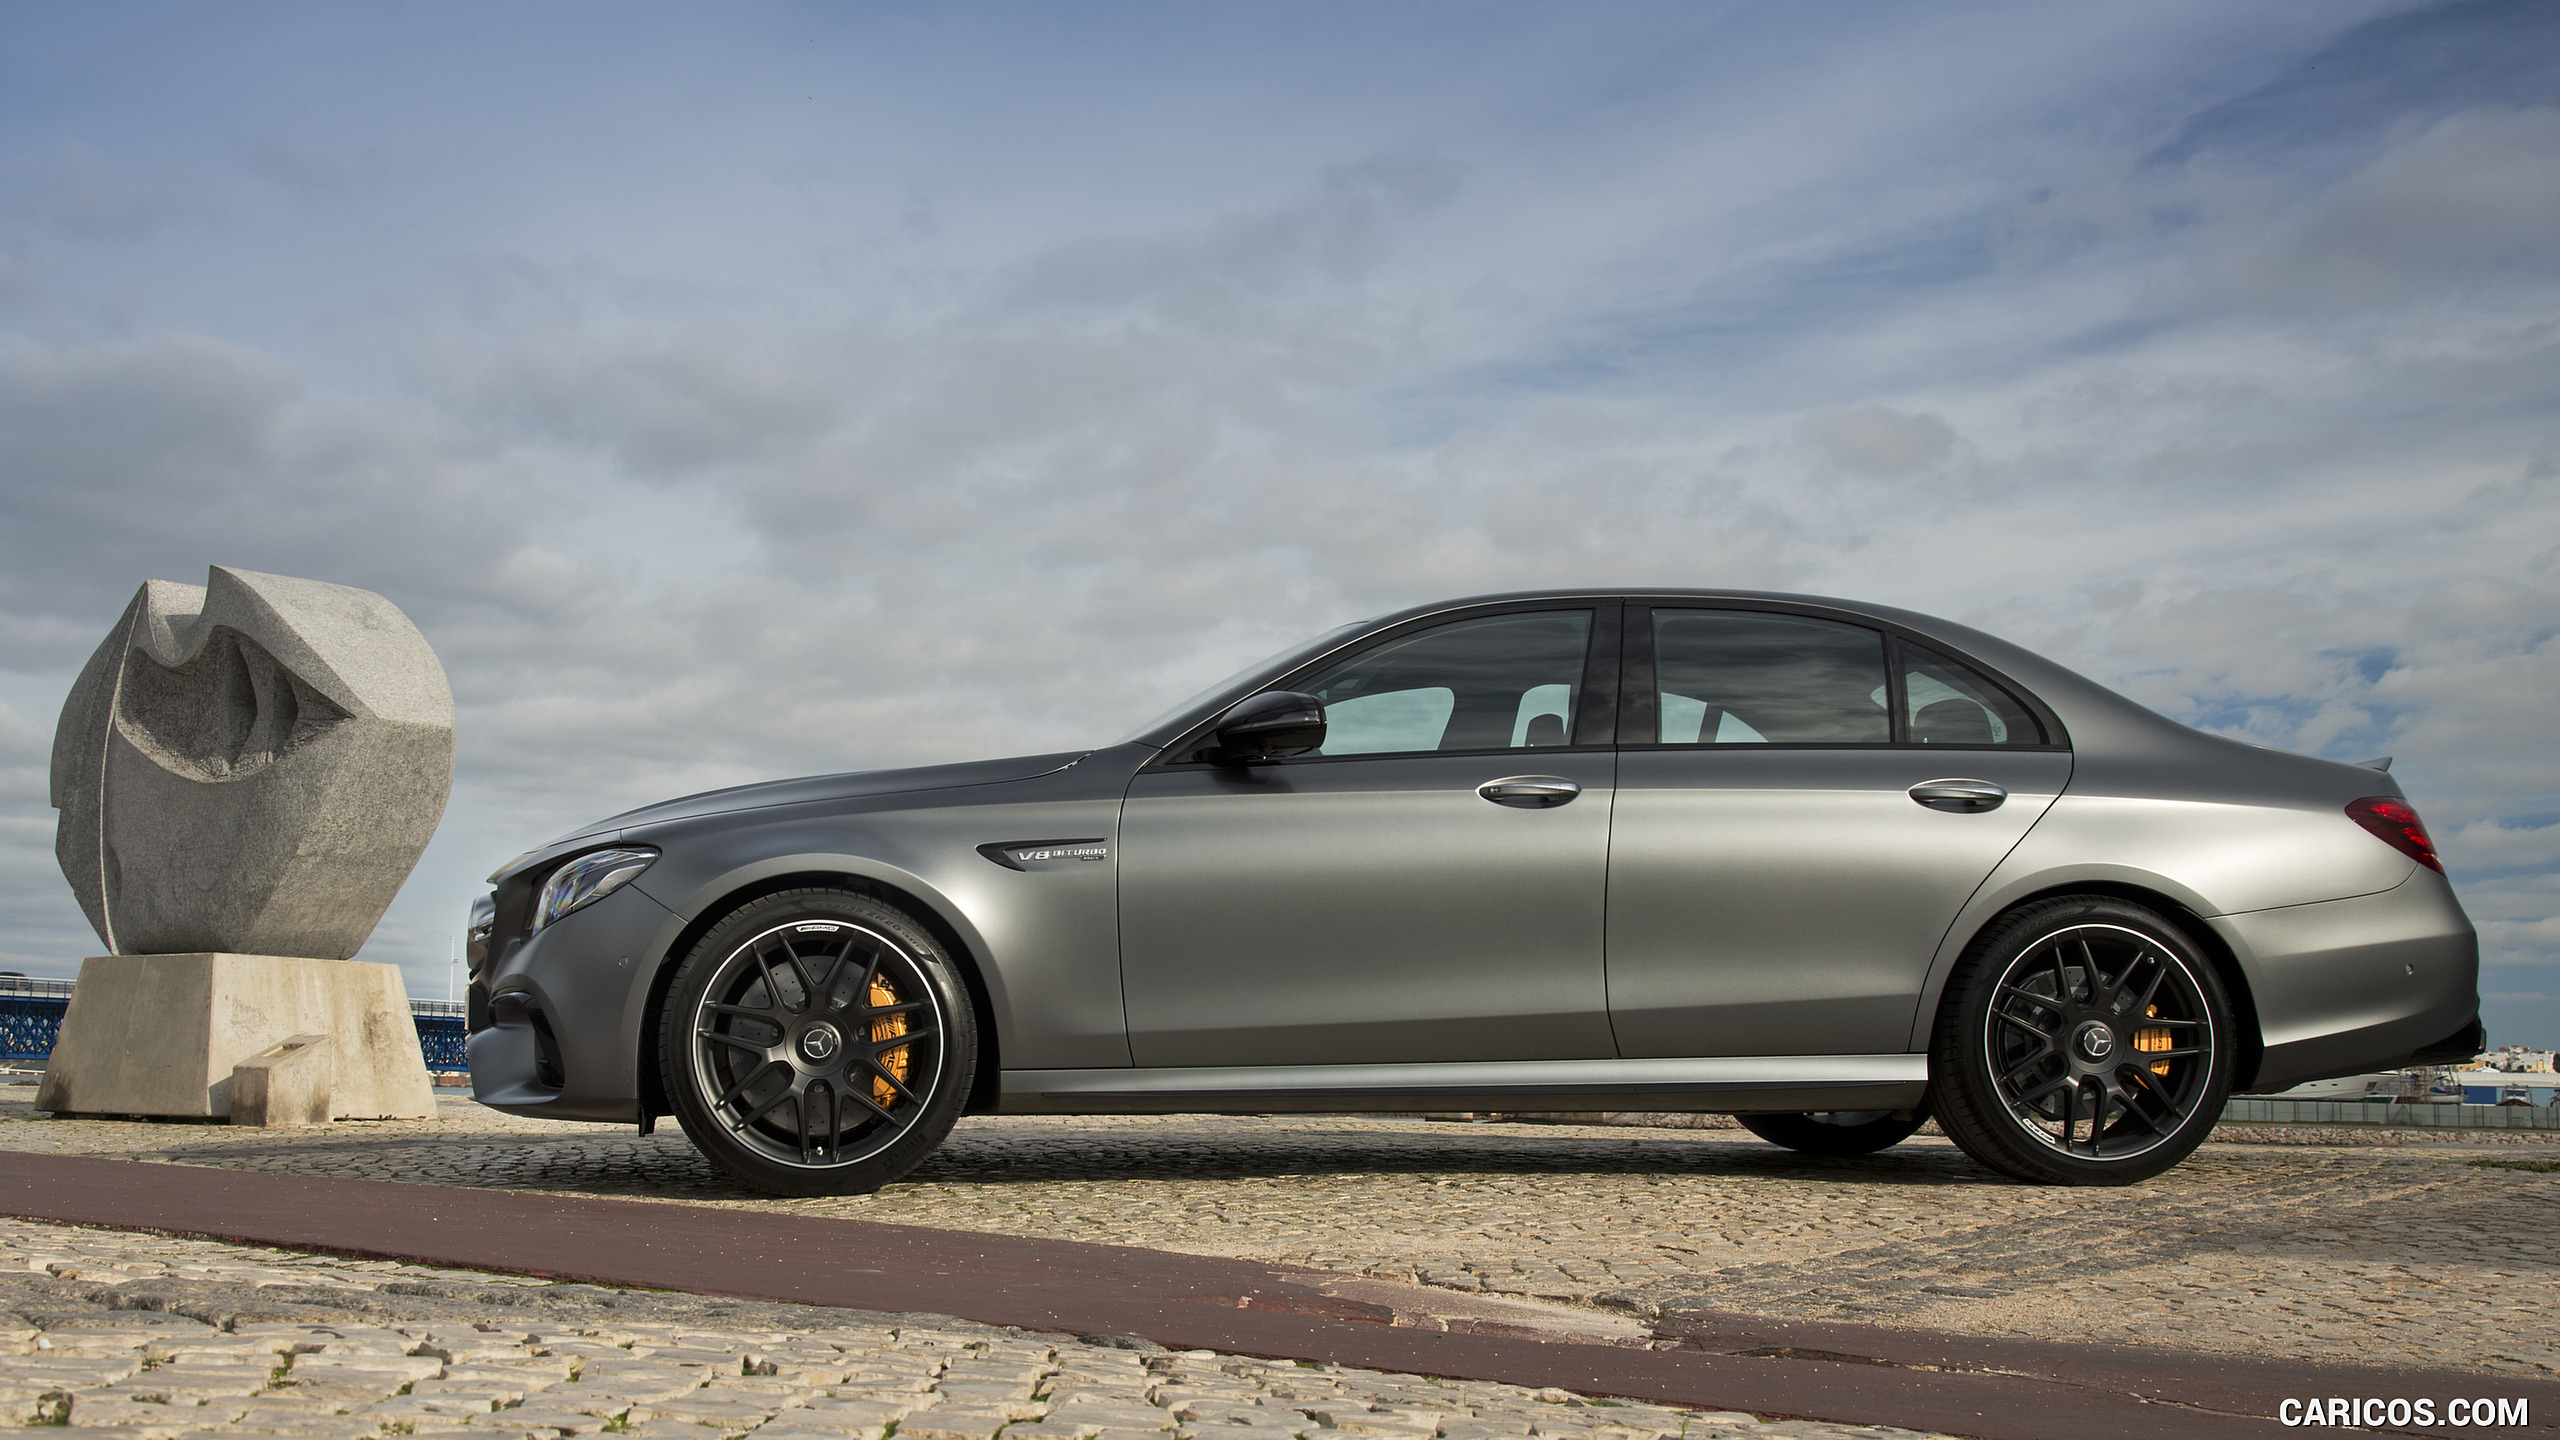 2018 Mercedes-AMG E63 S 4MATIC+ - Side, #299 of 323